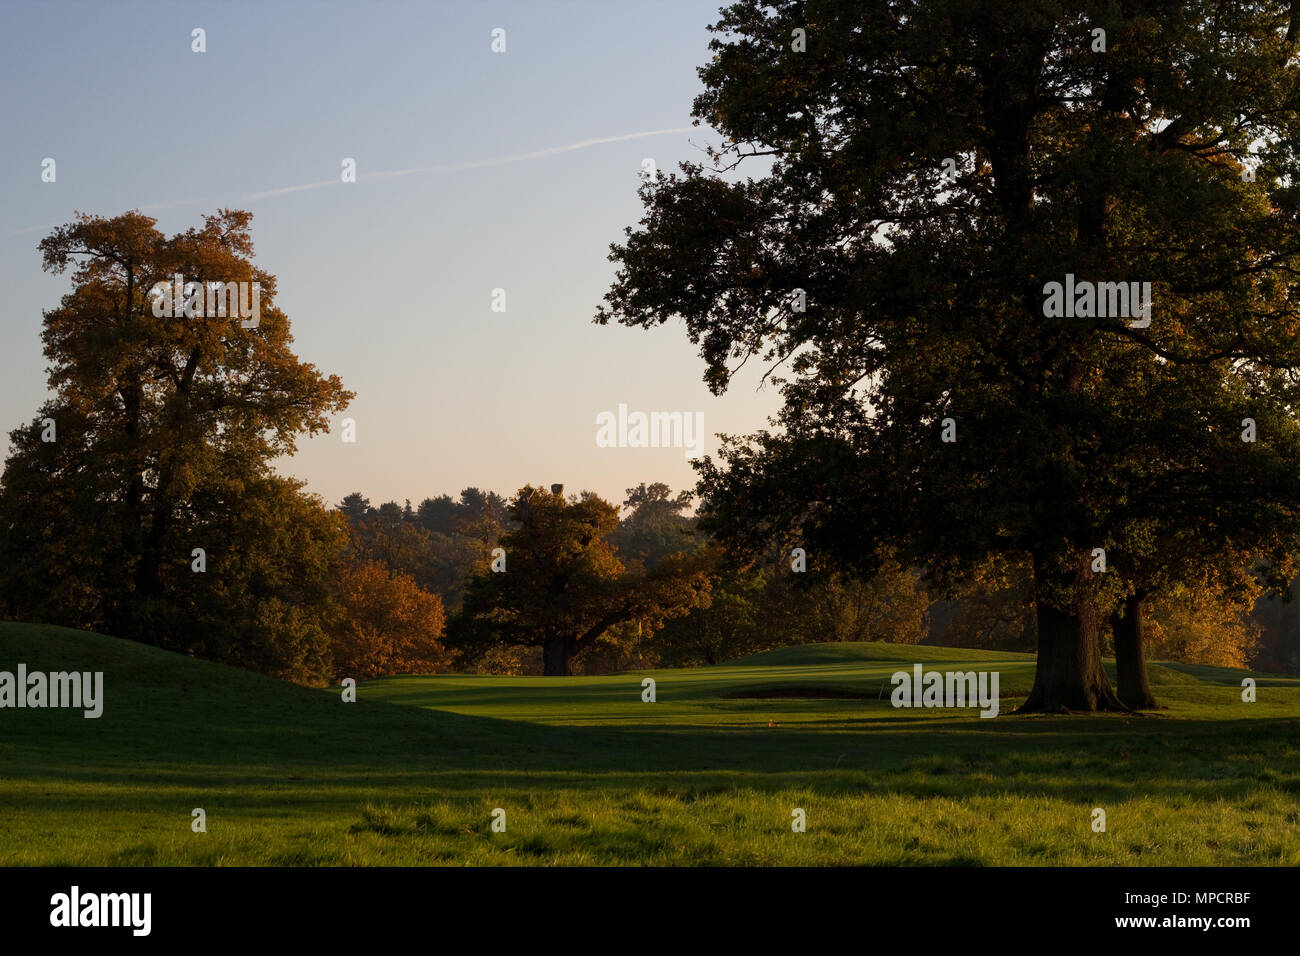 The Golf Course in Autumn, Brocket Hall, Hertfordshire Stock Photo